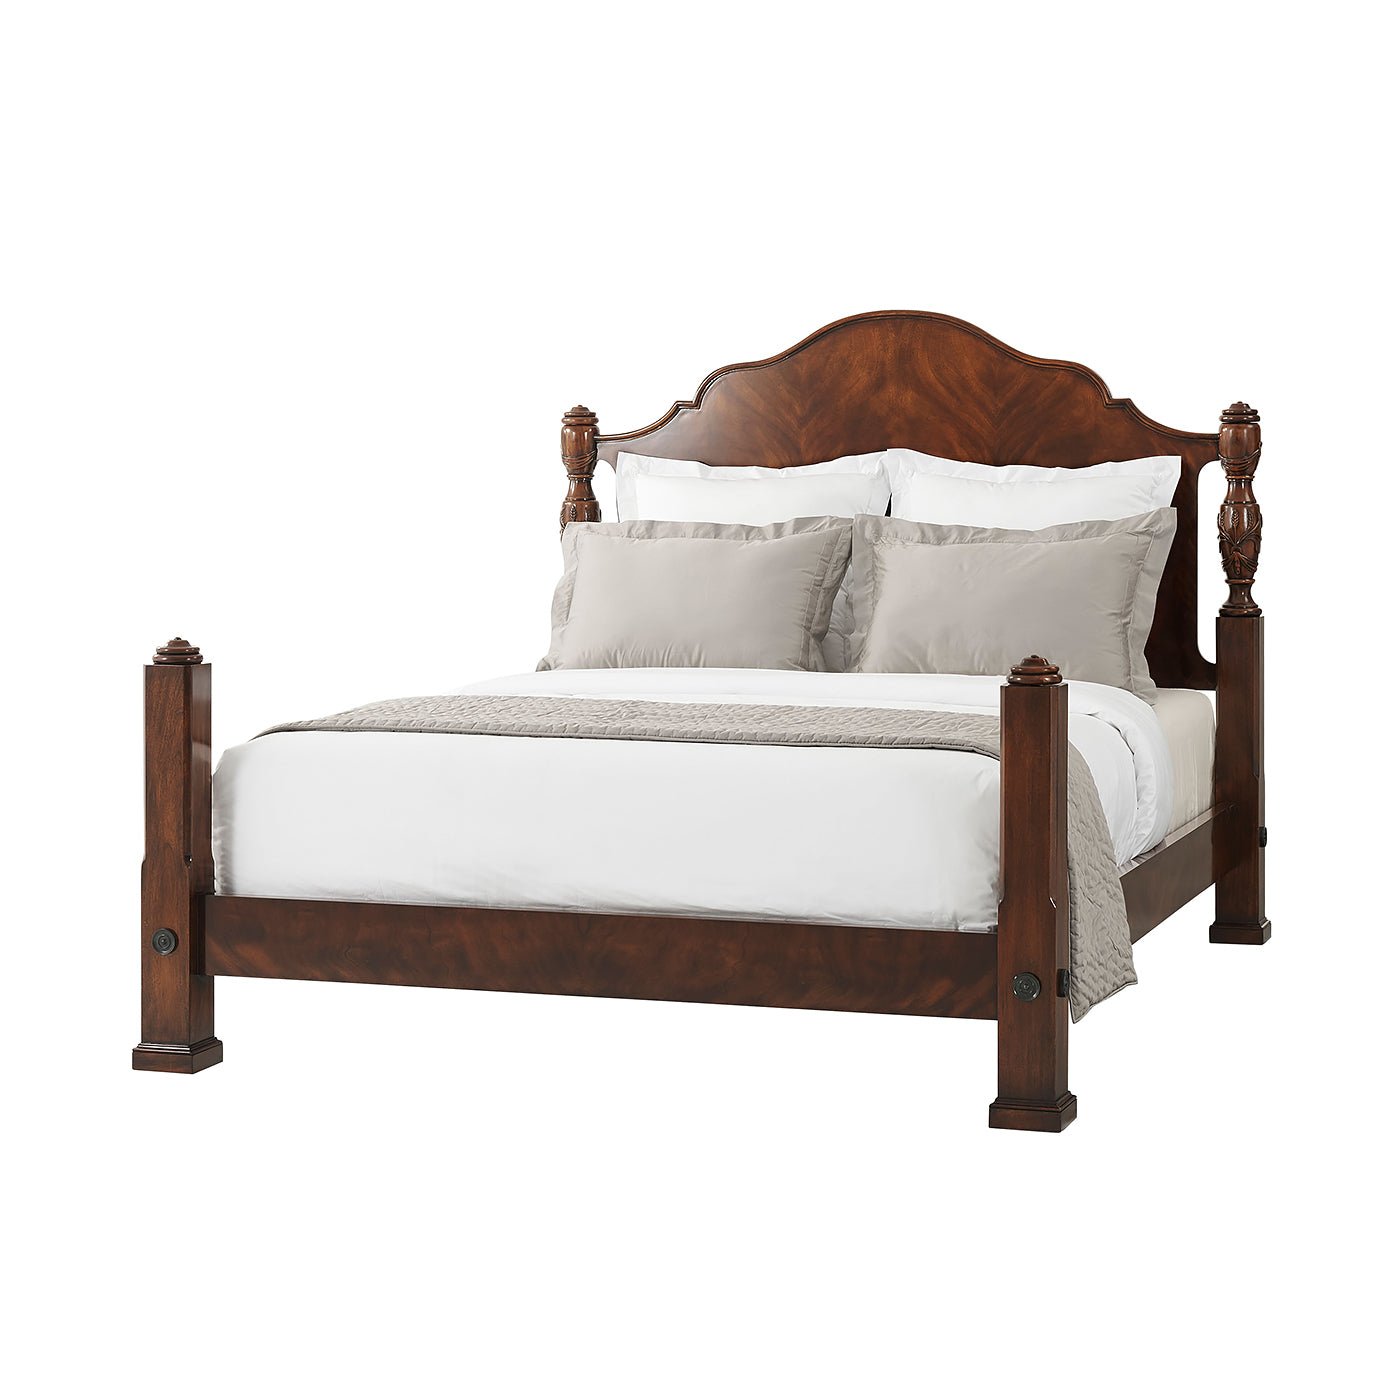 Carved Mahogany Four Post Bed - Queen - English Georgian America